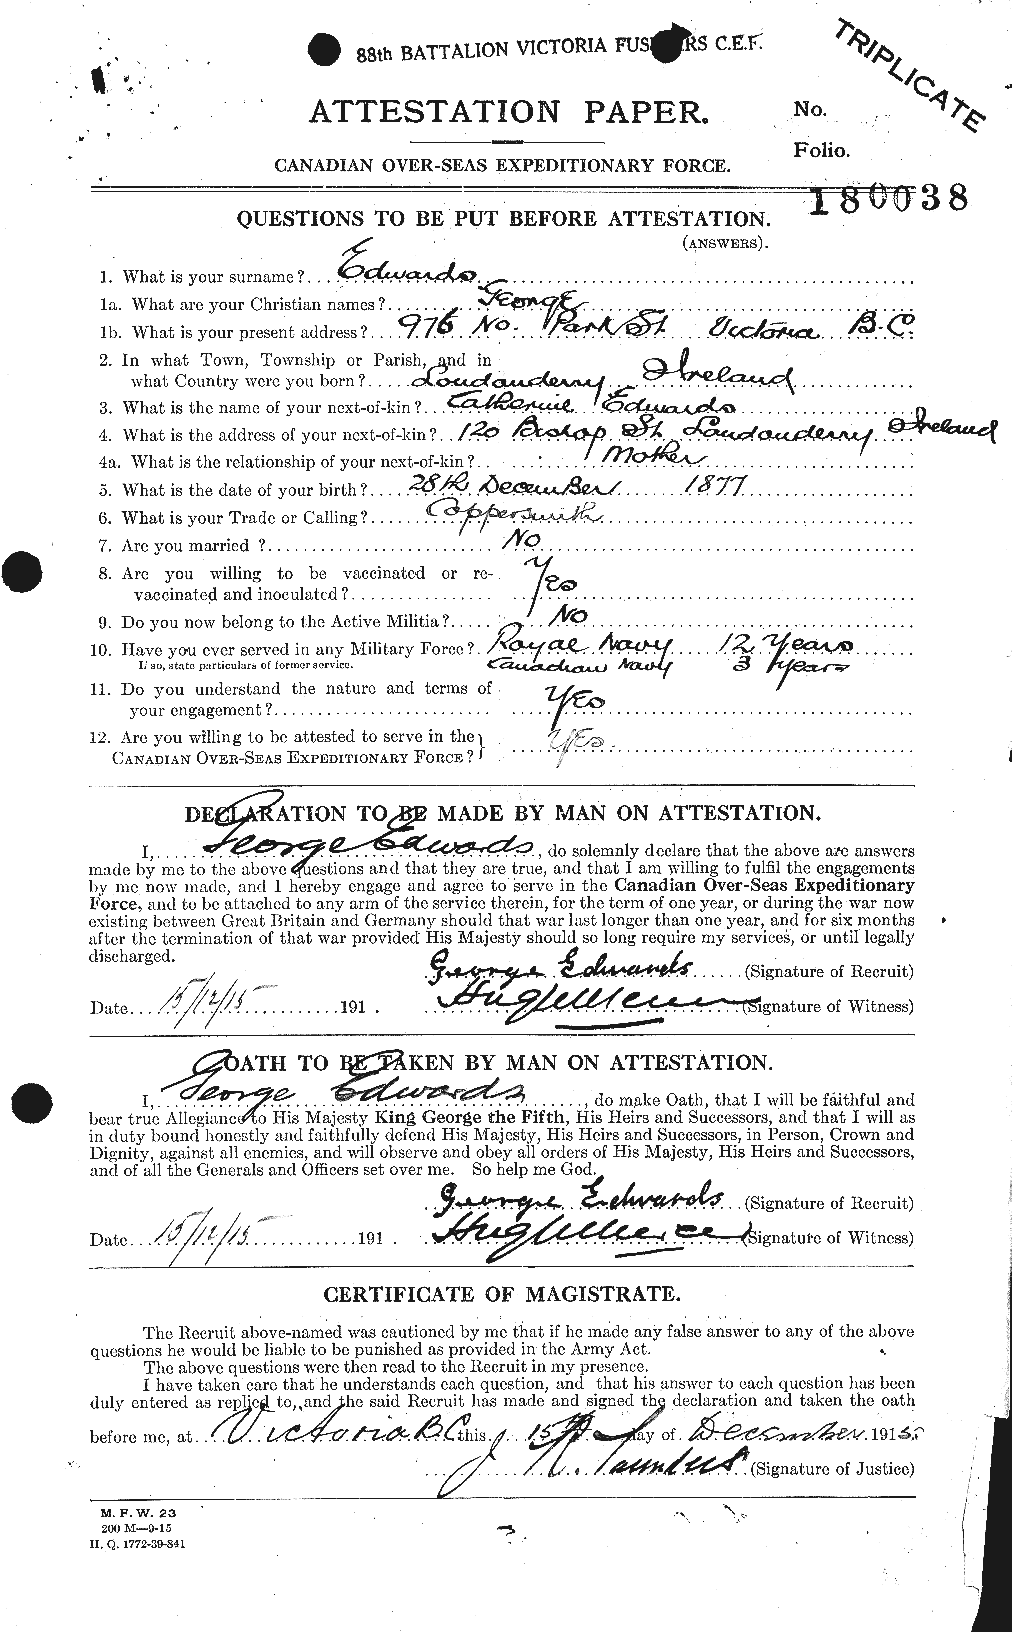 Personnel Records of the First World War - CEF 309097a